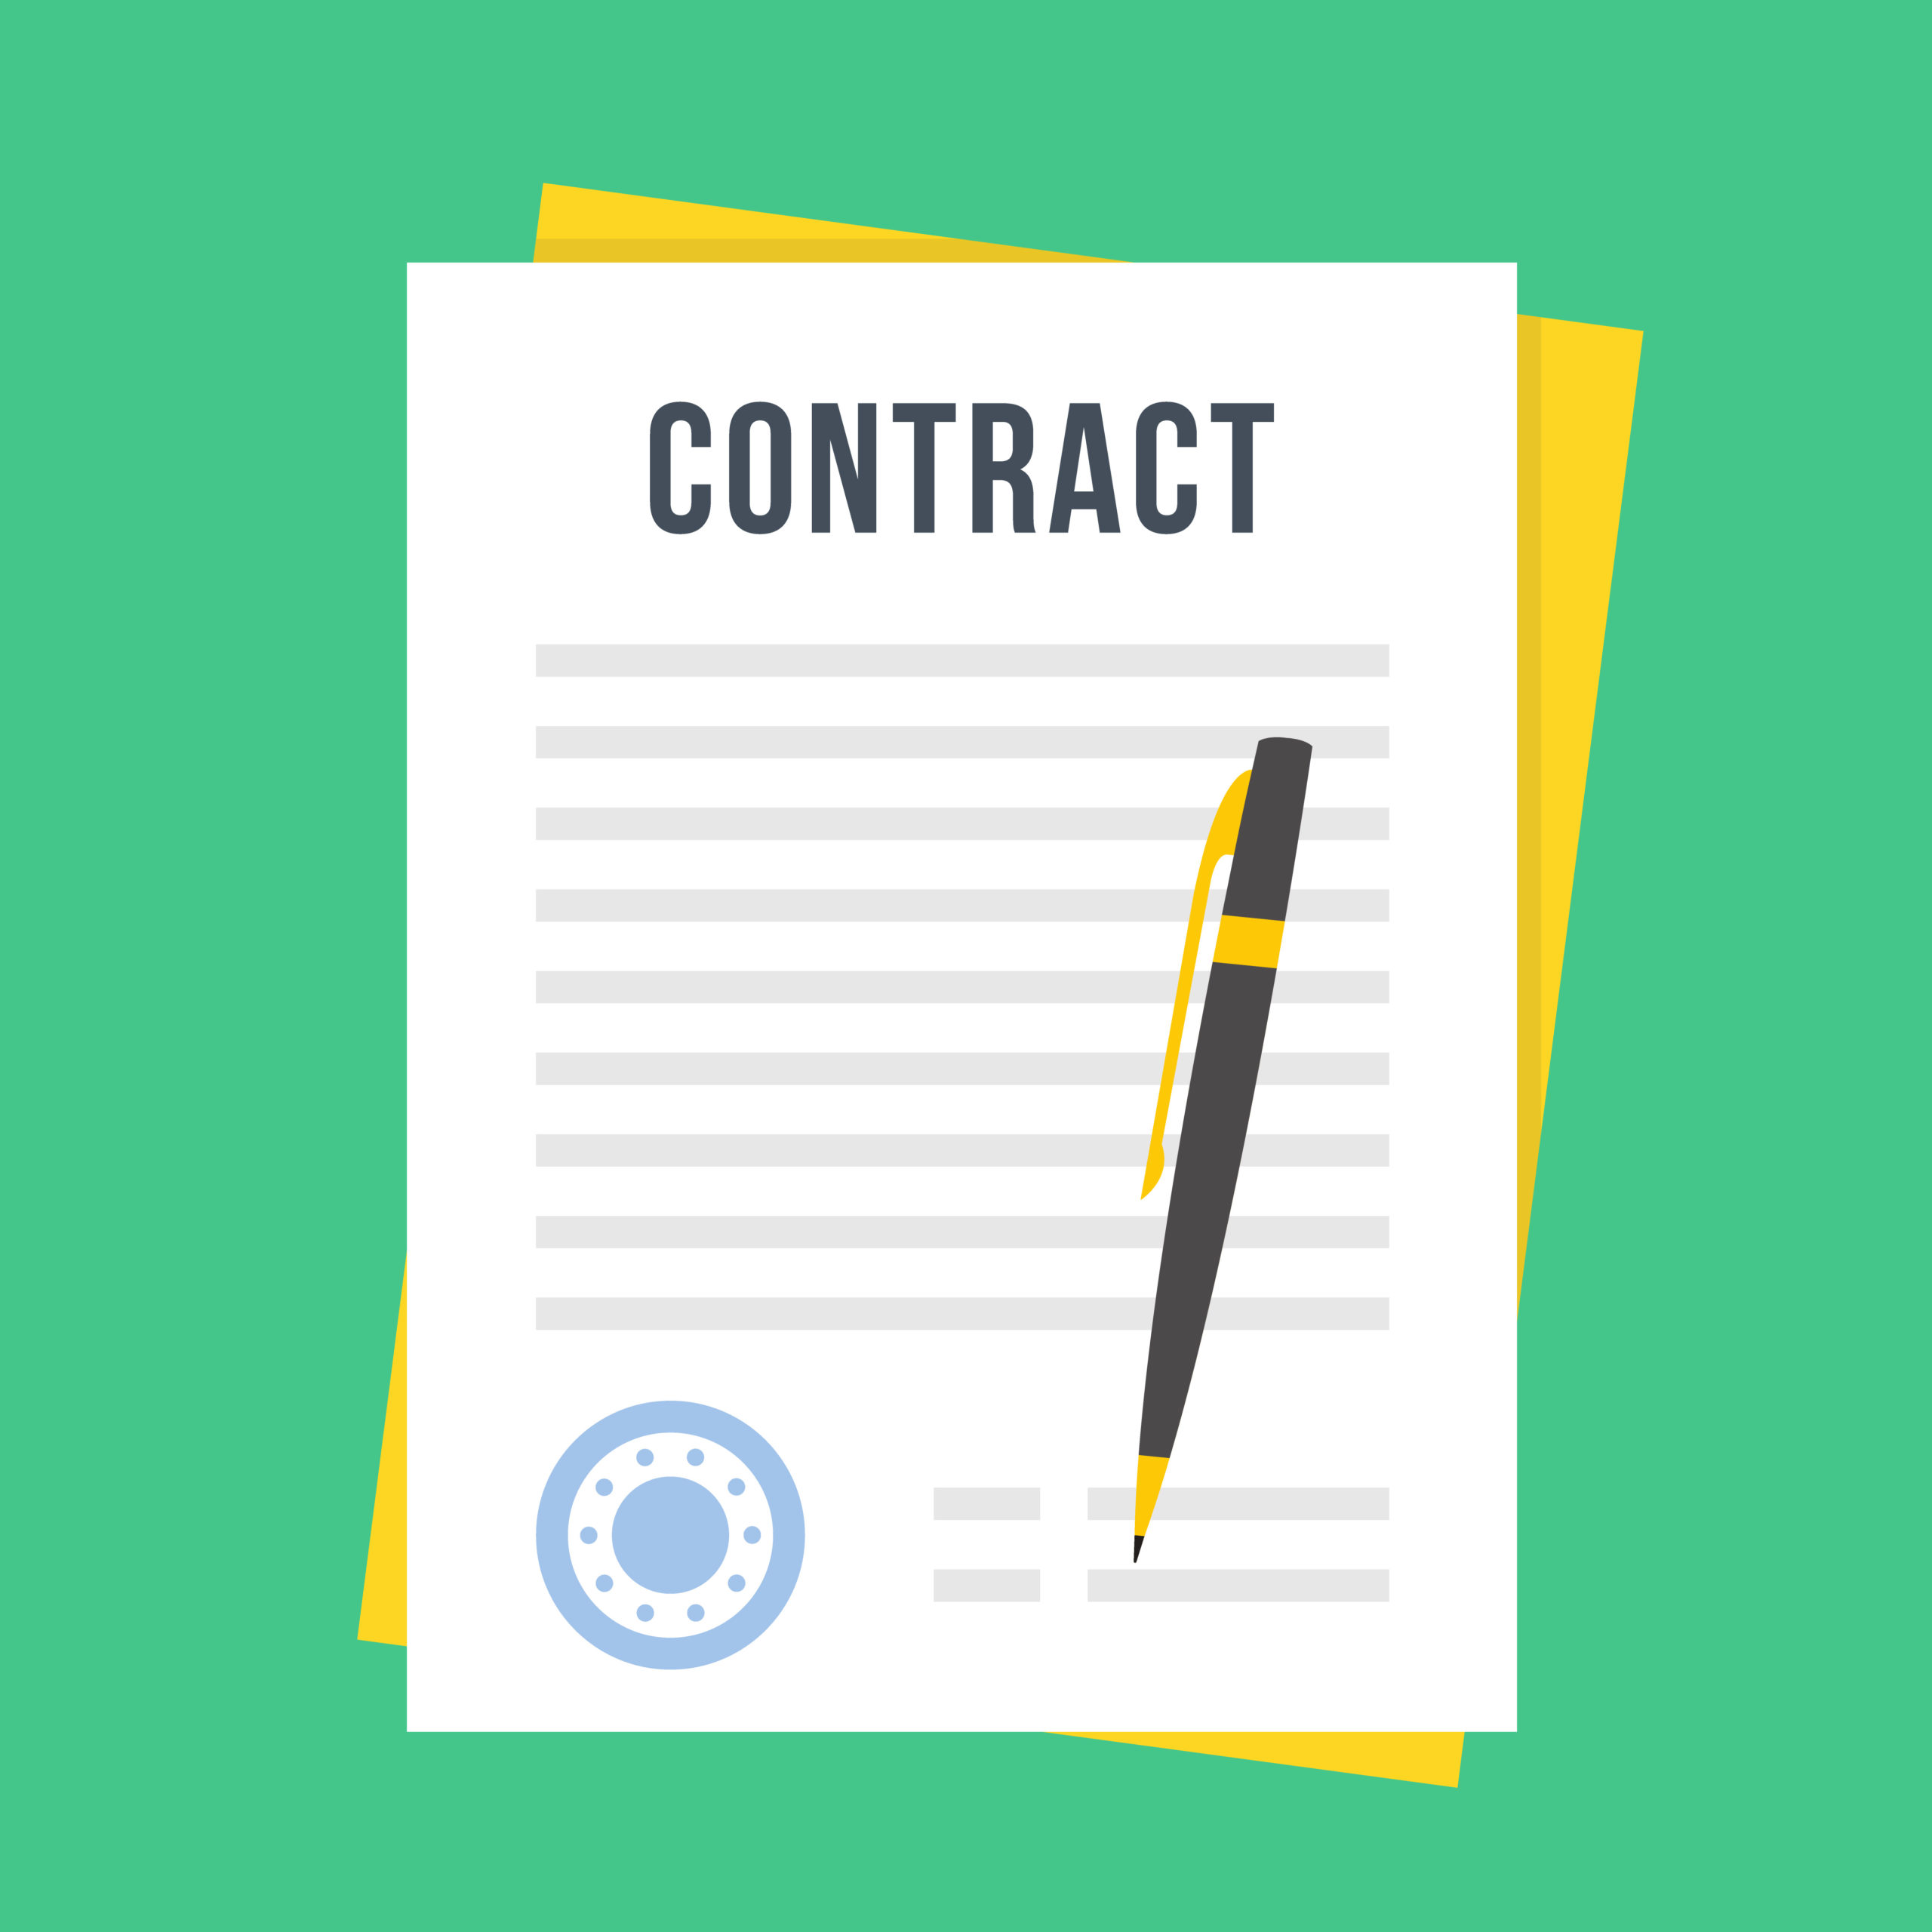 contract document with rubber stamp and pen in reference to null and void contracts